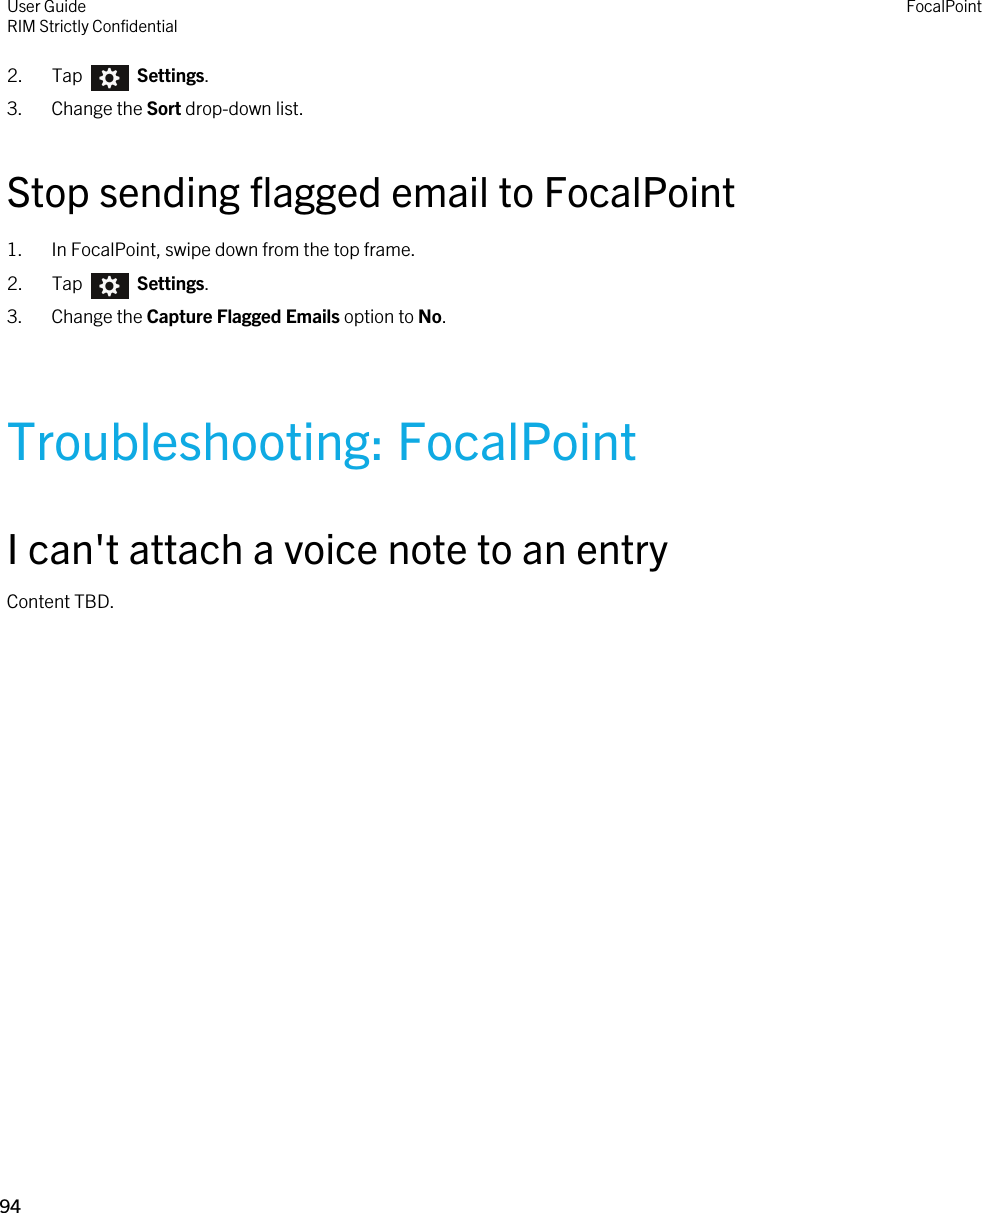 2.  Tap    Settings.3. Change the Sort drop-down list.Stop sending flagged email to FocalPoint1. In FocalPoint, swipe down from the top frame.2.  Tap    Settings.3. Change the Capture Flagged Emails option to No.Troubleshooting: FocalPointI can&apos;t attach a voice note to an entryContent TBD.User GuideRIM Strictly ConfidentialFocalPoint94 